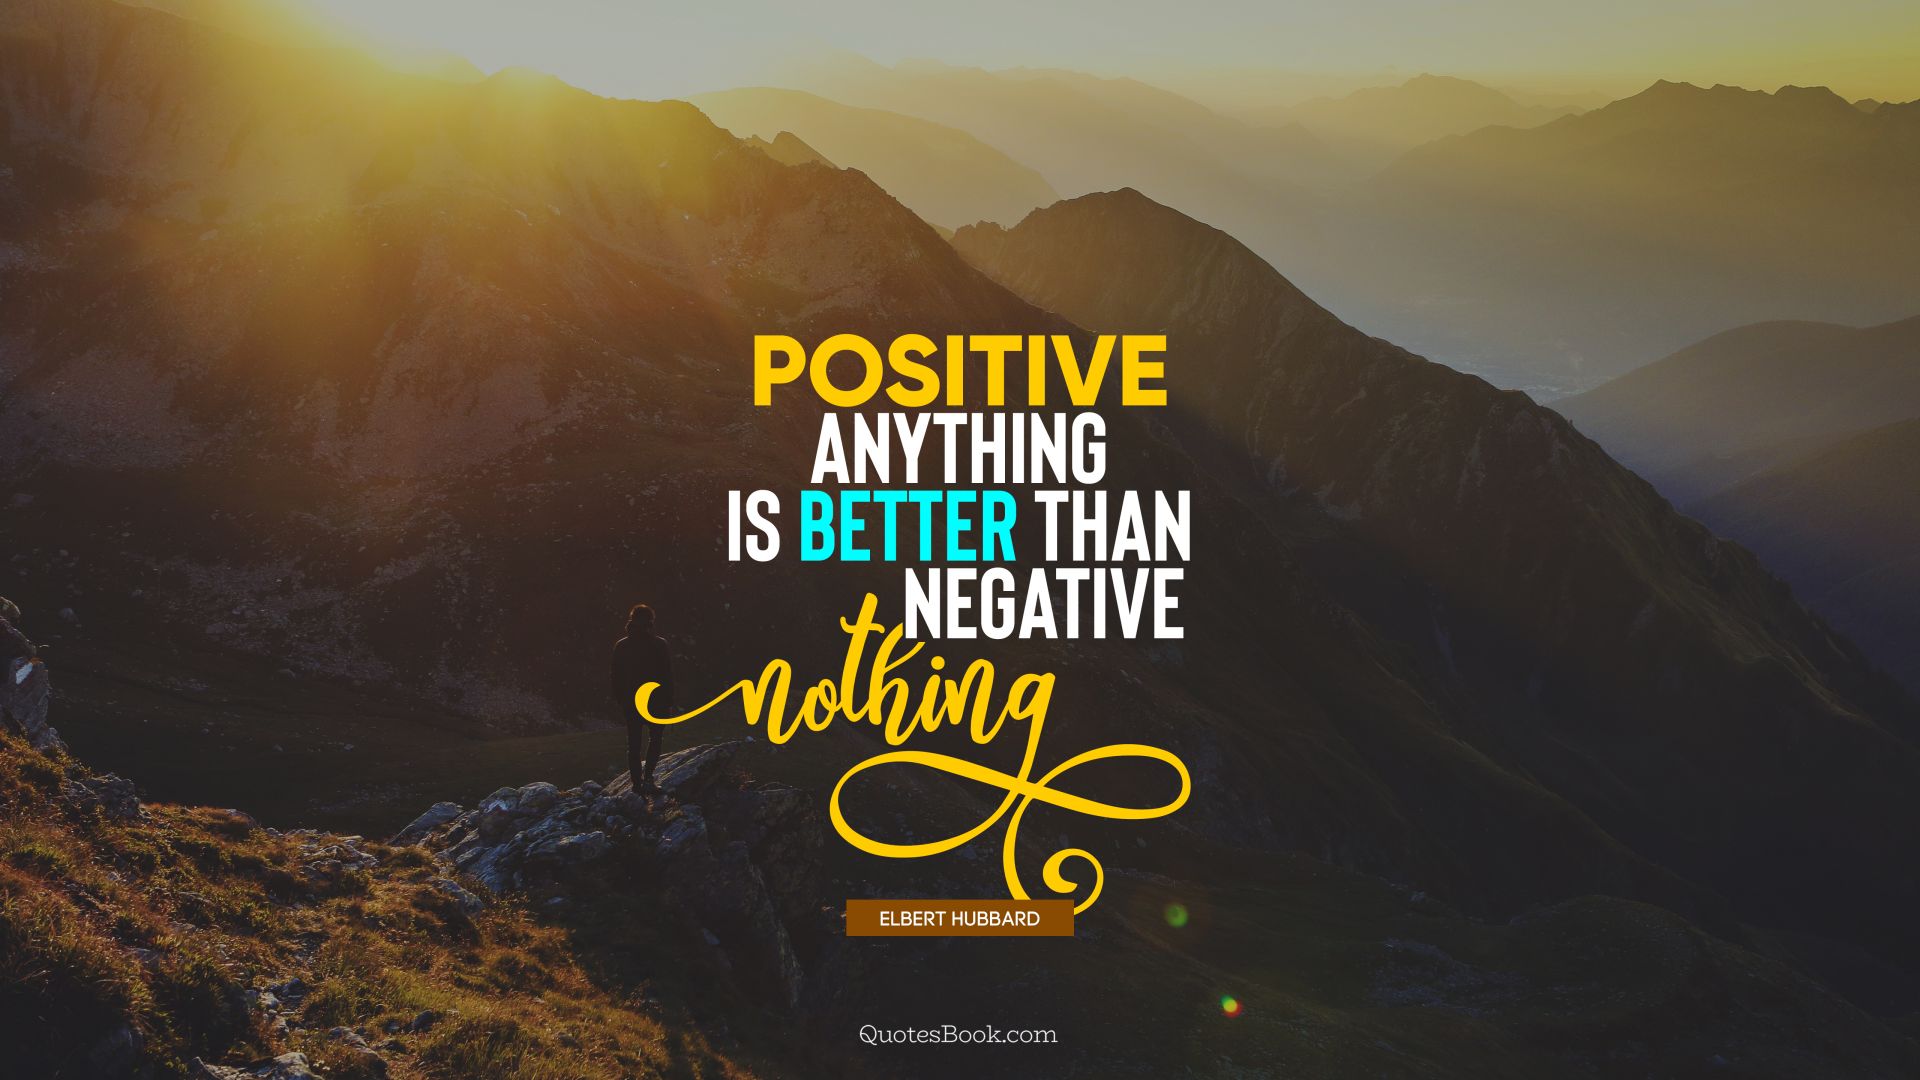 Positive anything is better than negative nothing. - Quote by Elbert Hubbard